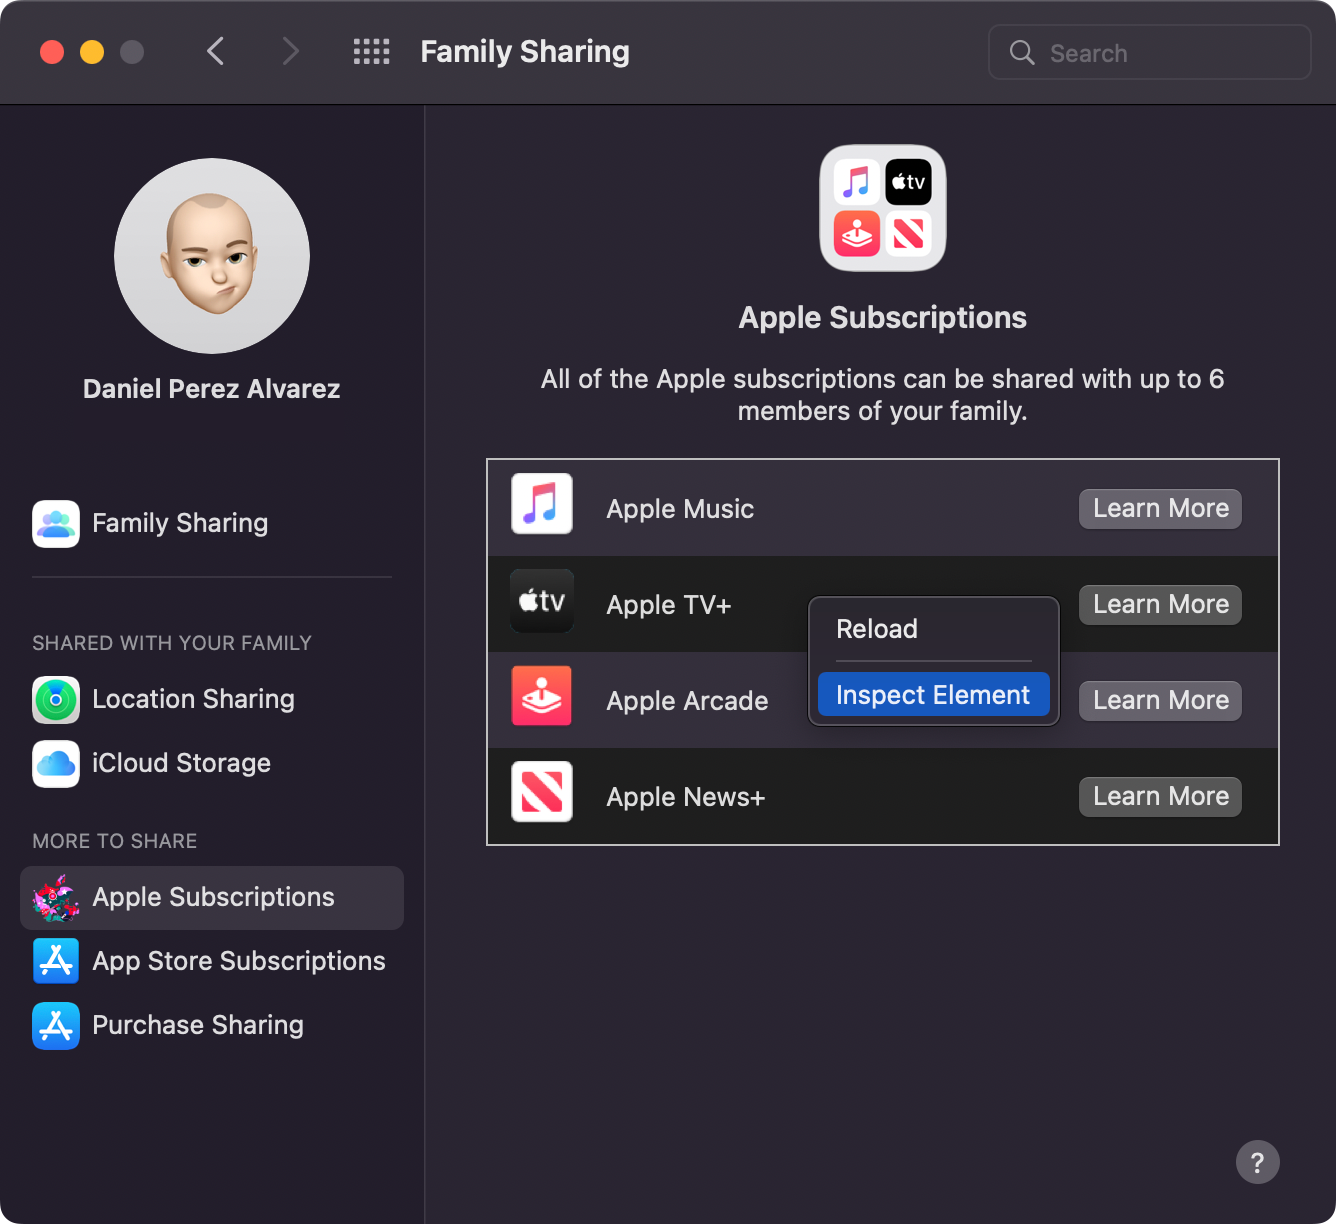 Family Sharing screen with context menu showing &ldquo;Inspect Element&rdquo; option